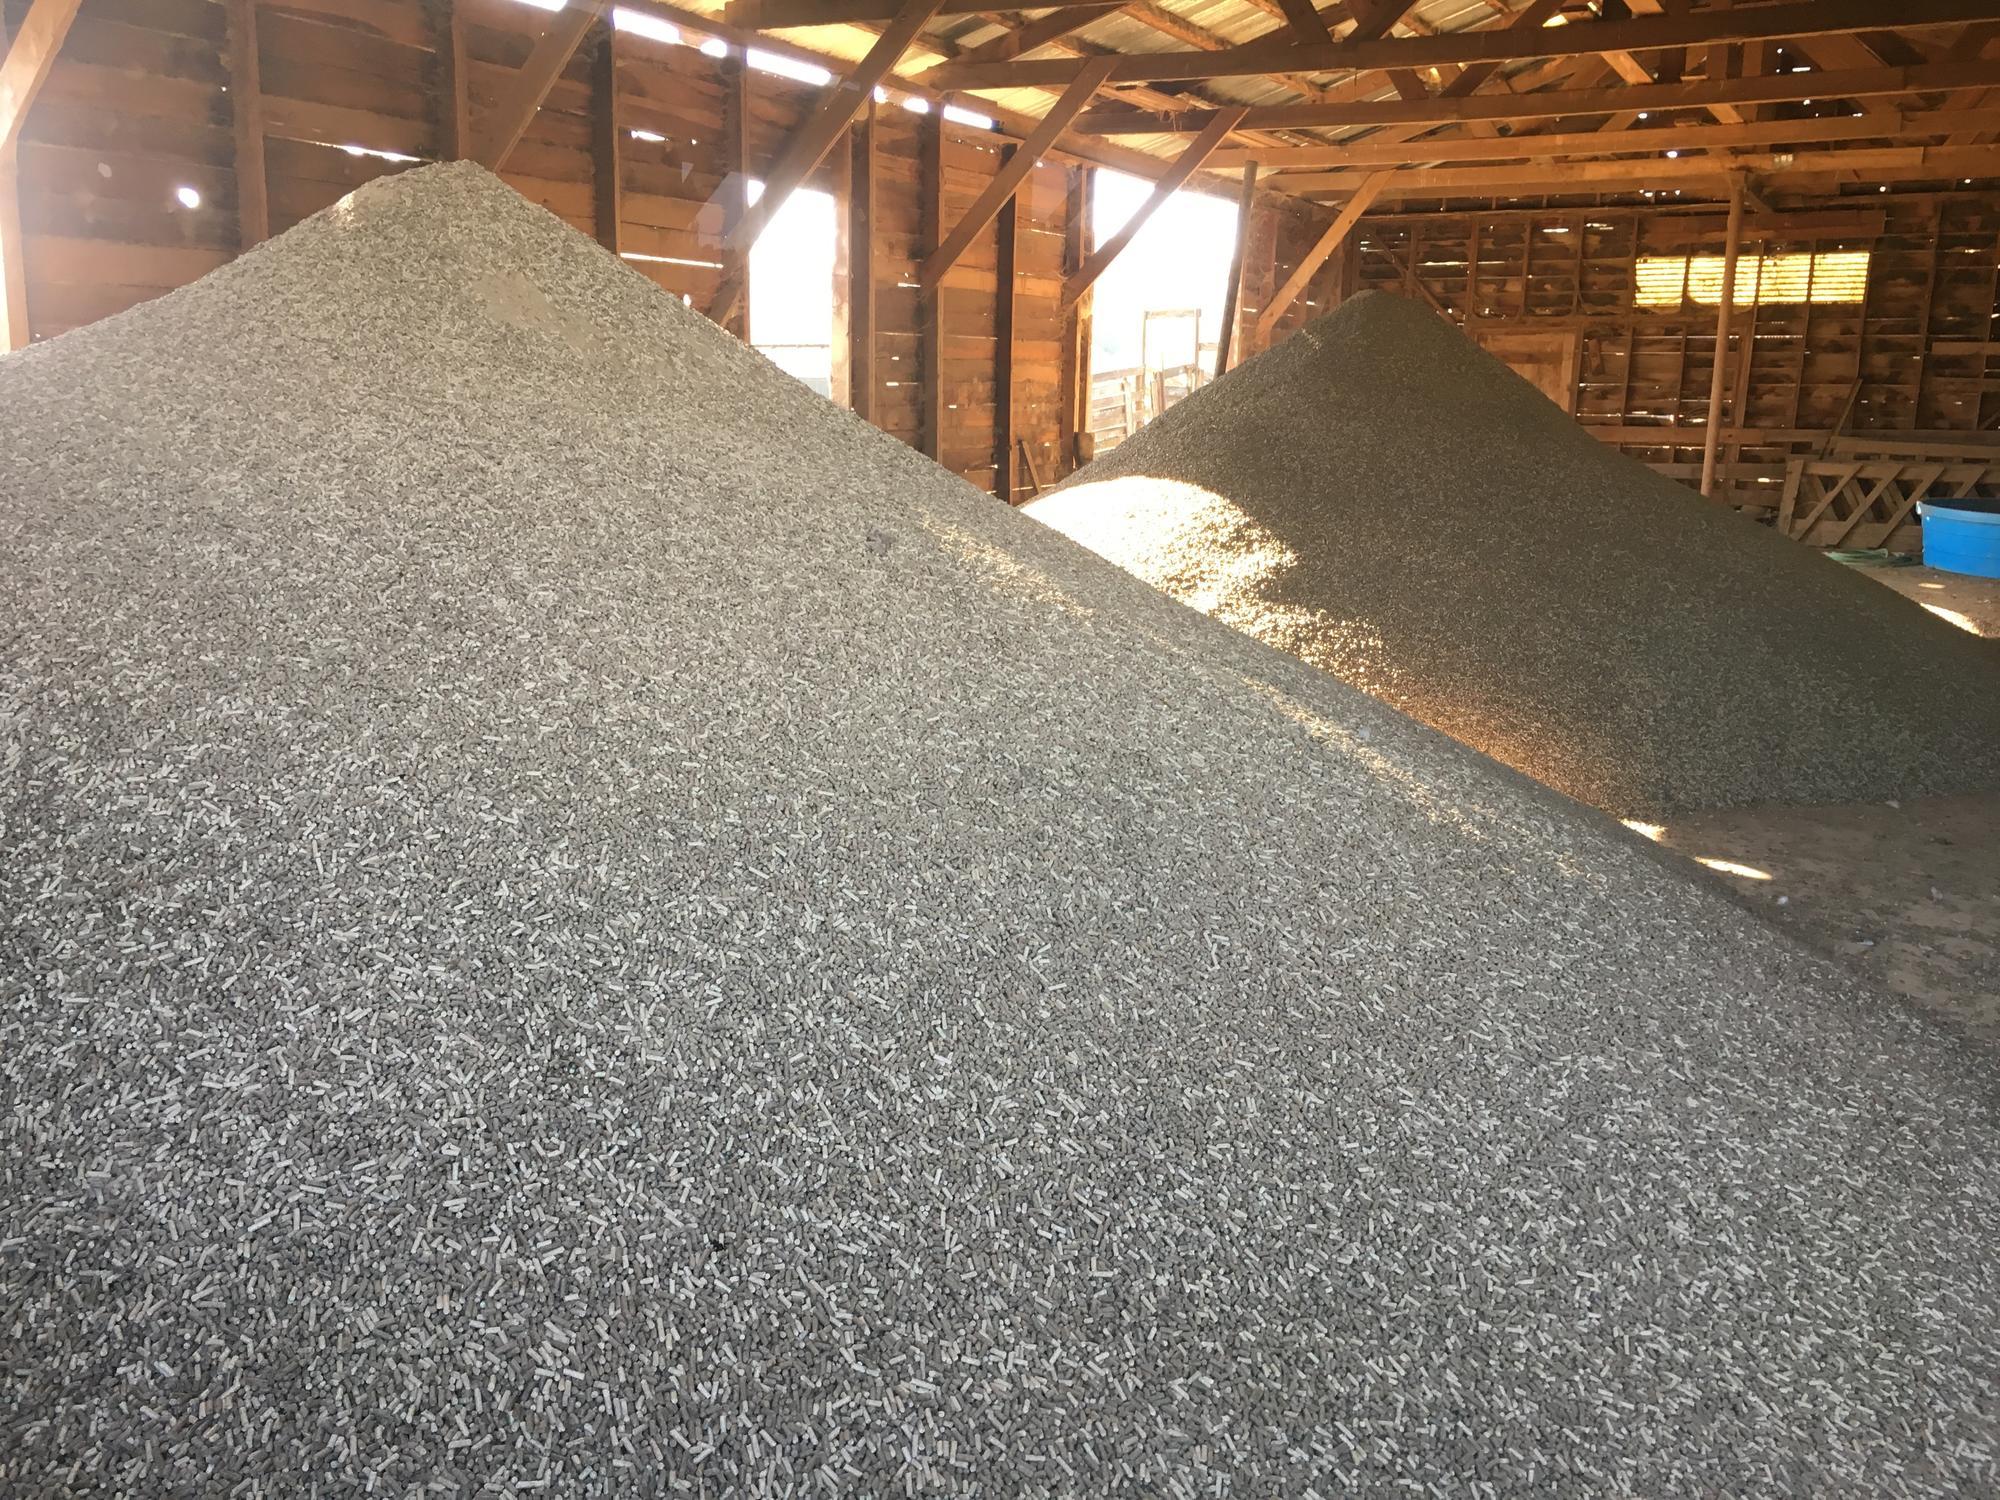 Grass seed pellet pile in a barn.